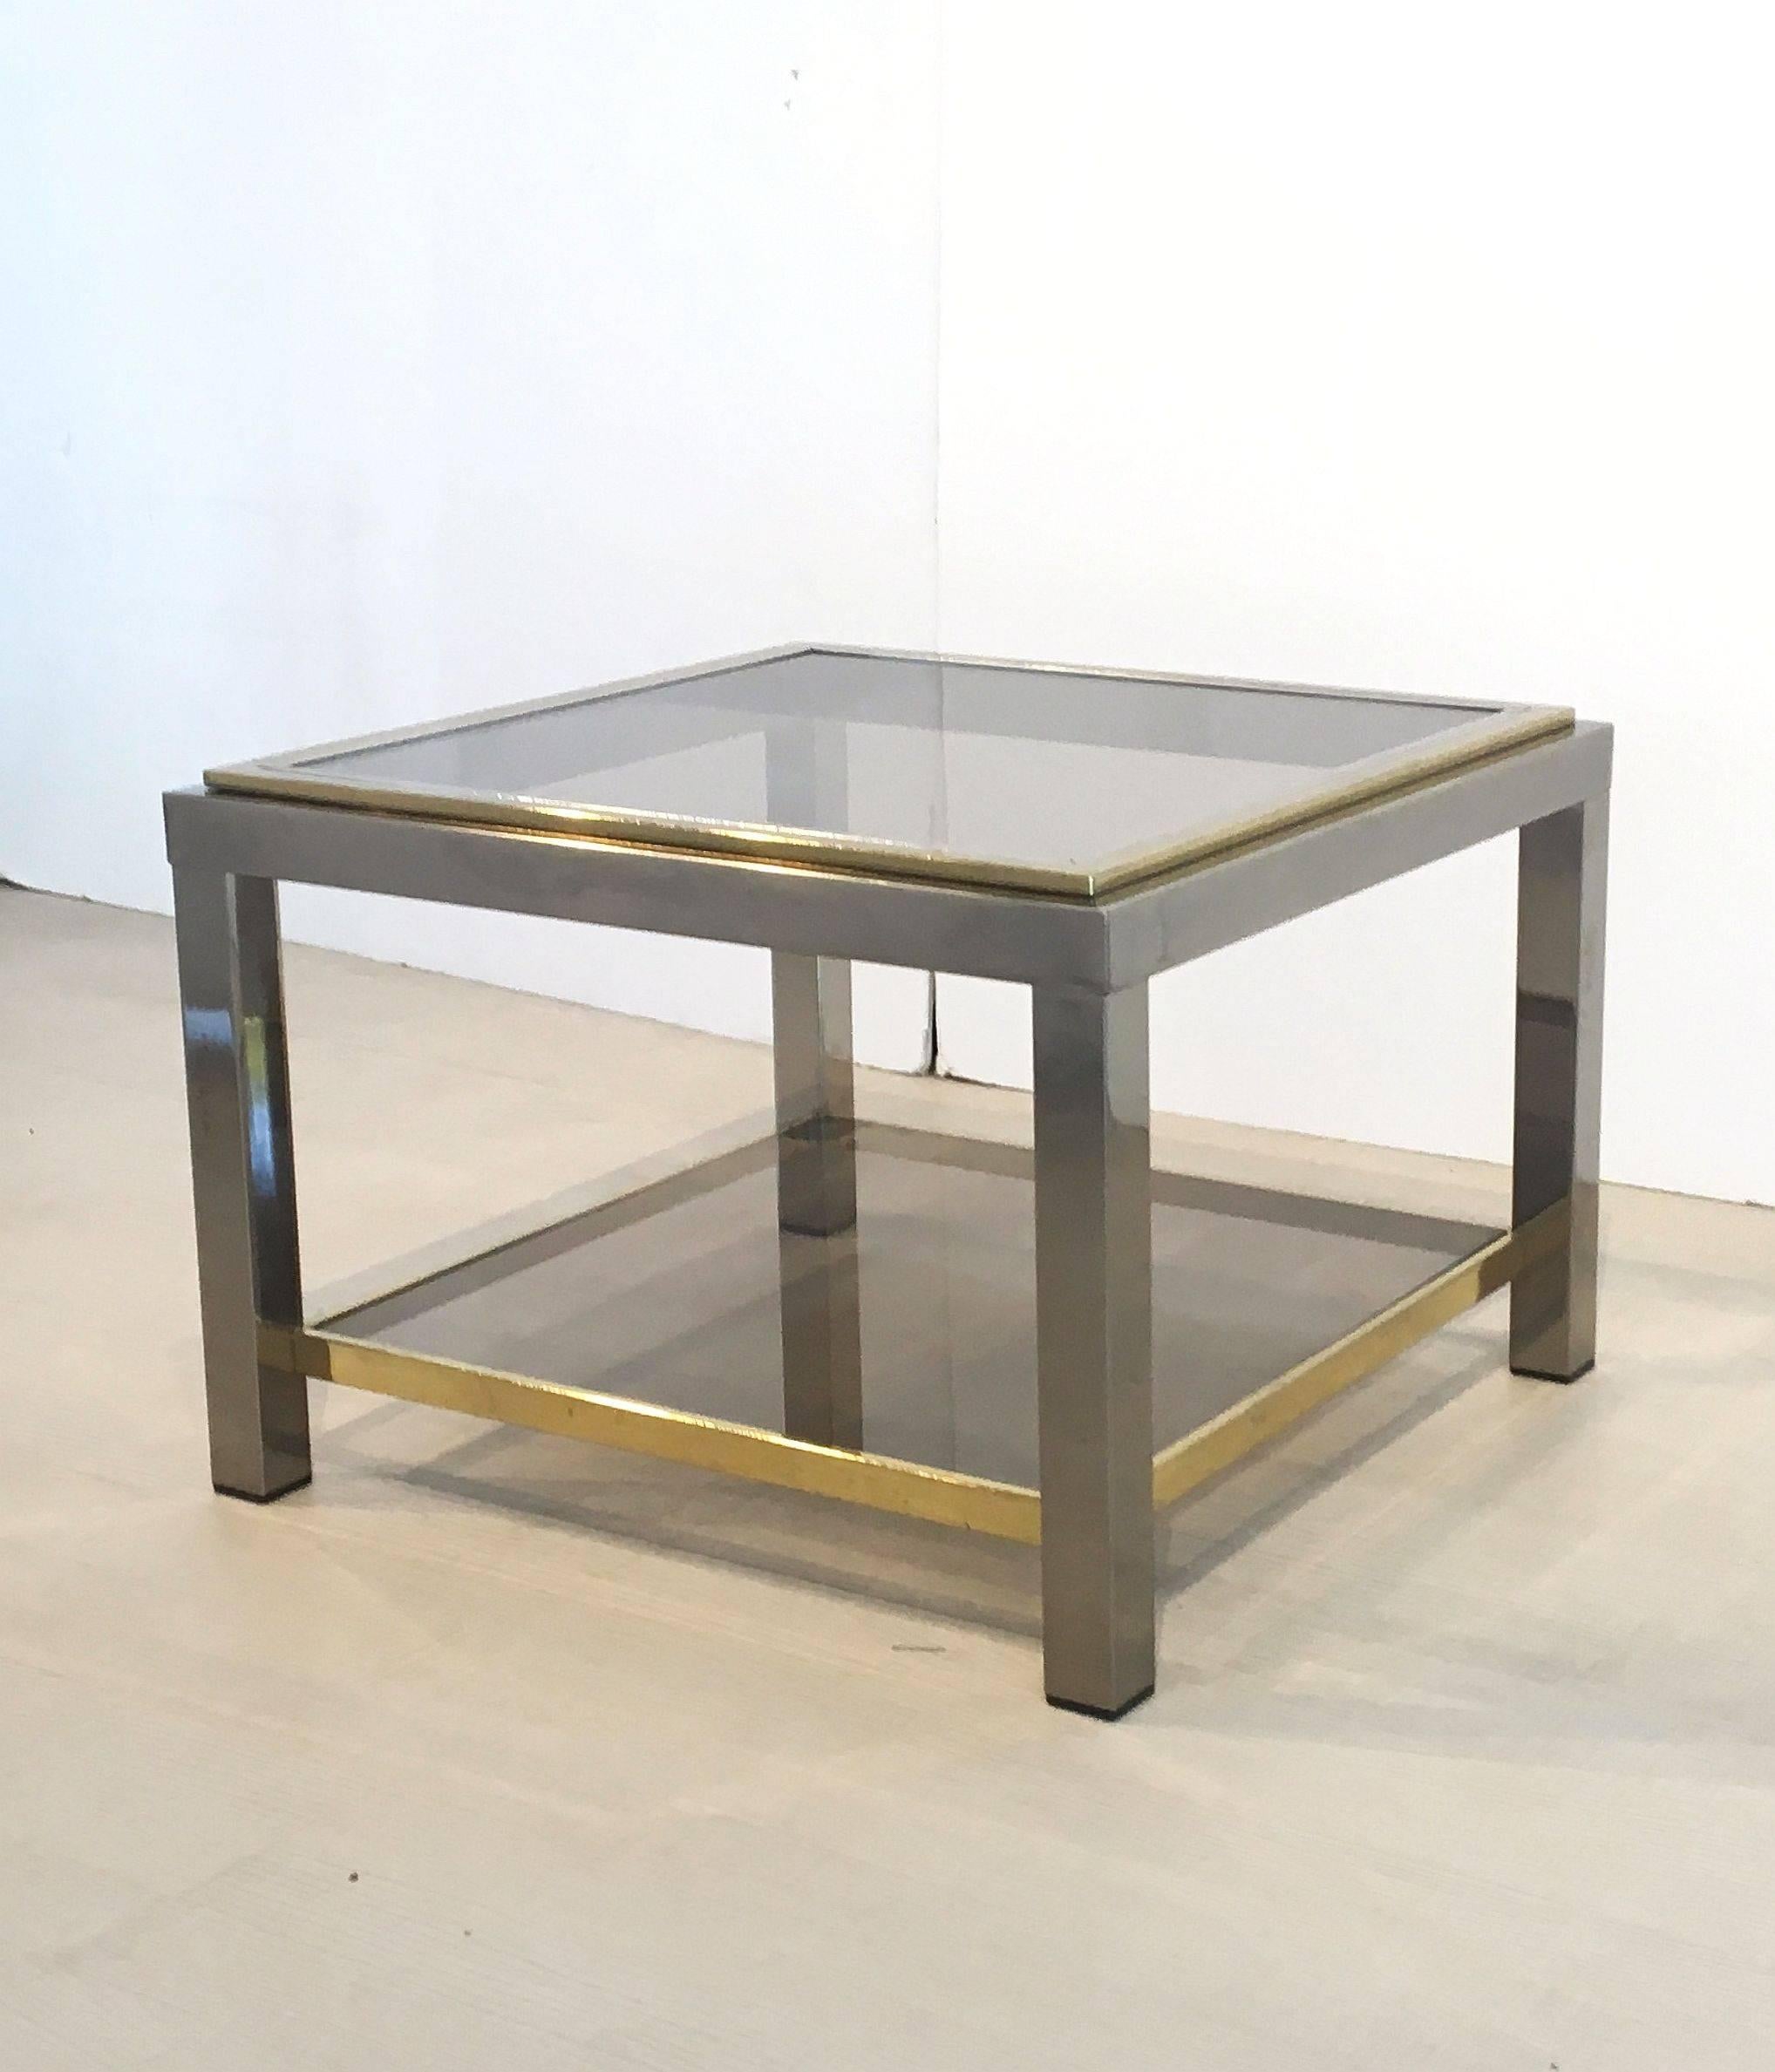 20th Century Italian Square Low Table of Brass, Chrome, and Smoked Glass by Zevi For Sale